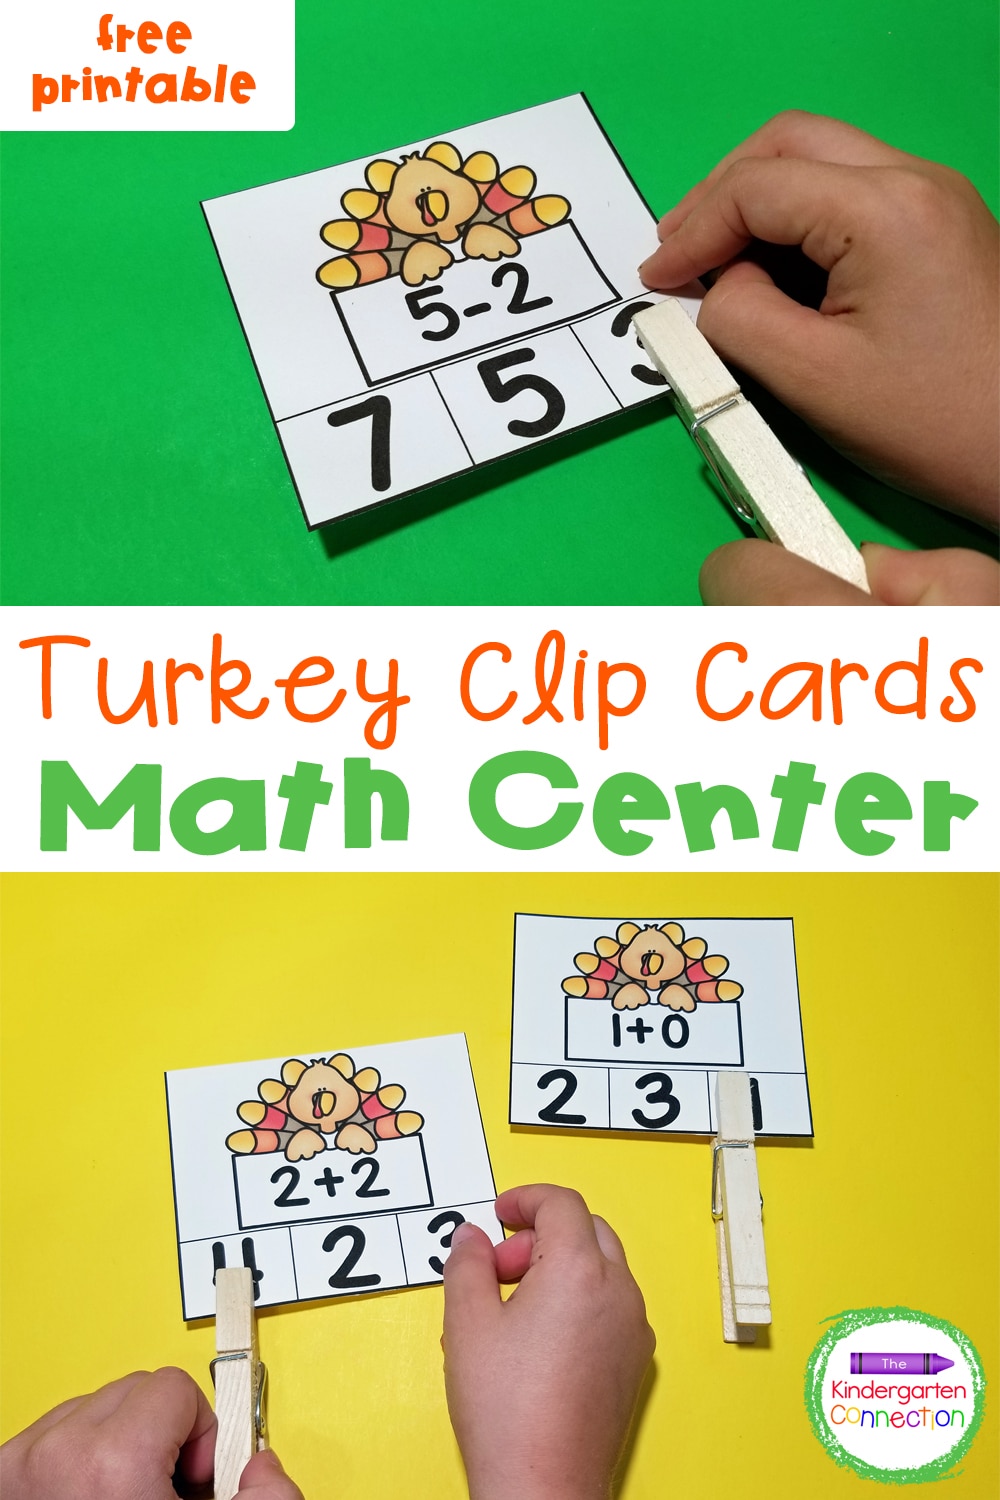 Work on beginning addition and subtraction with these free Turkey Math Clip Cards! They are perfect for Kindergarten and early 1st grade!